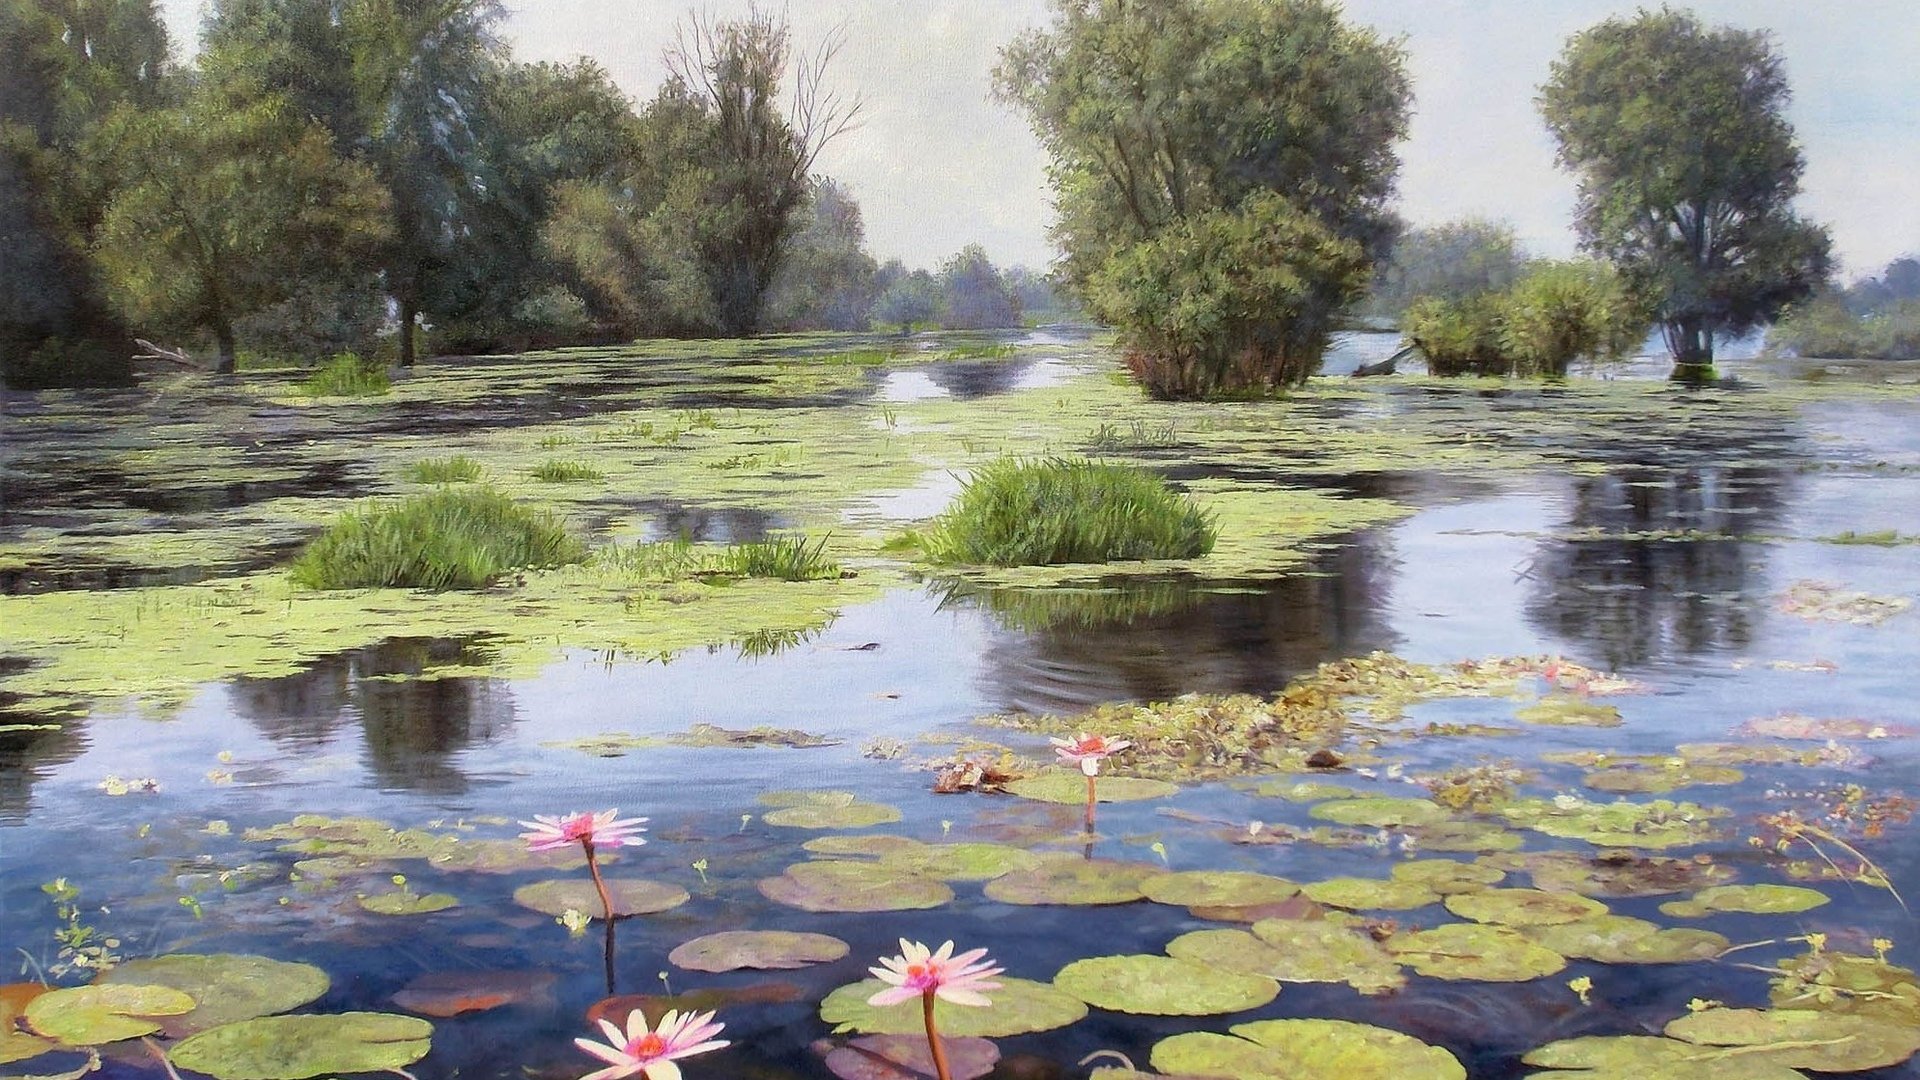 Zbigniew Kopania, Pond, Flowers, Reflection, Trees, Landscape, Summer, Painting Wallpaper